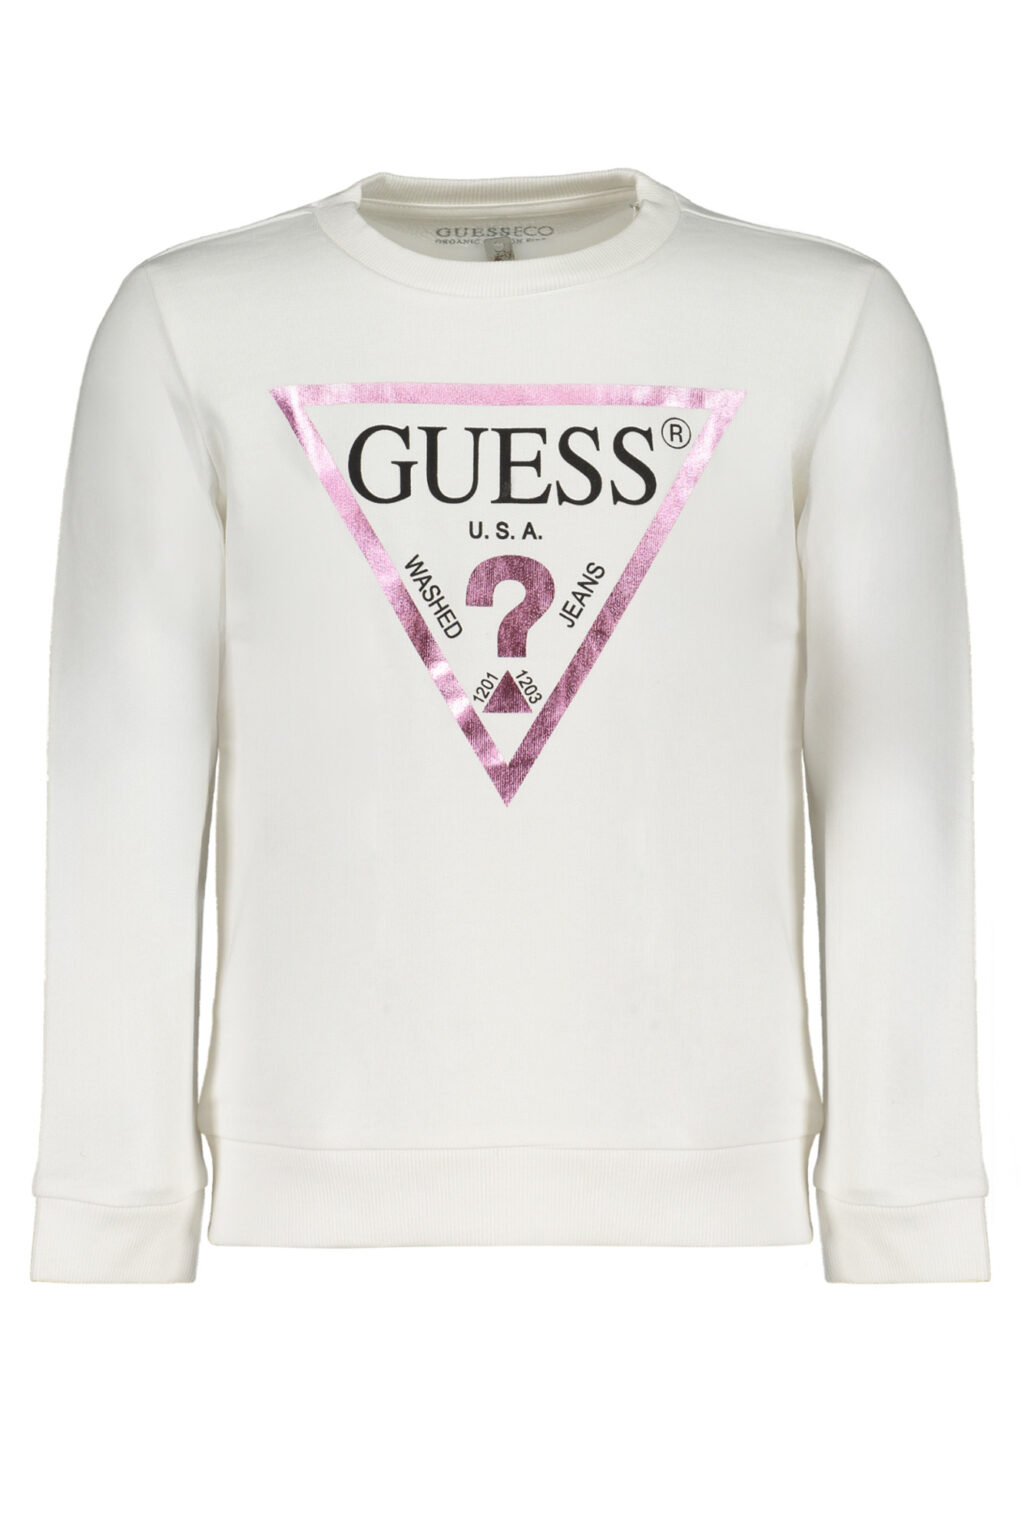 GUESS JEANS SWEATSHIRT WITHOUT ZIP FOR GIRLS WHITE K74Q12KAUG0_BITWHT